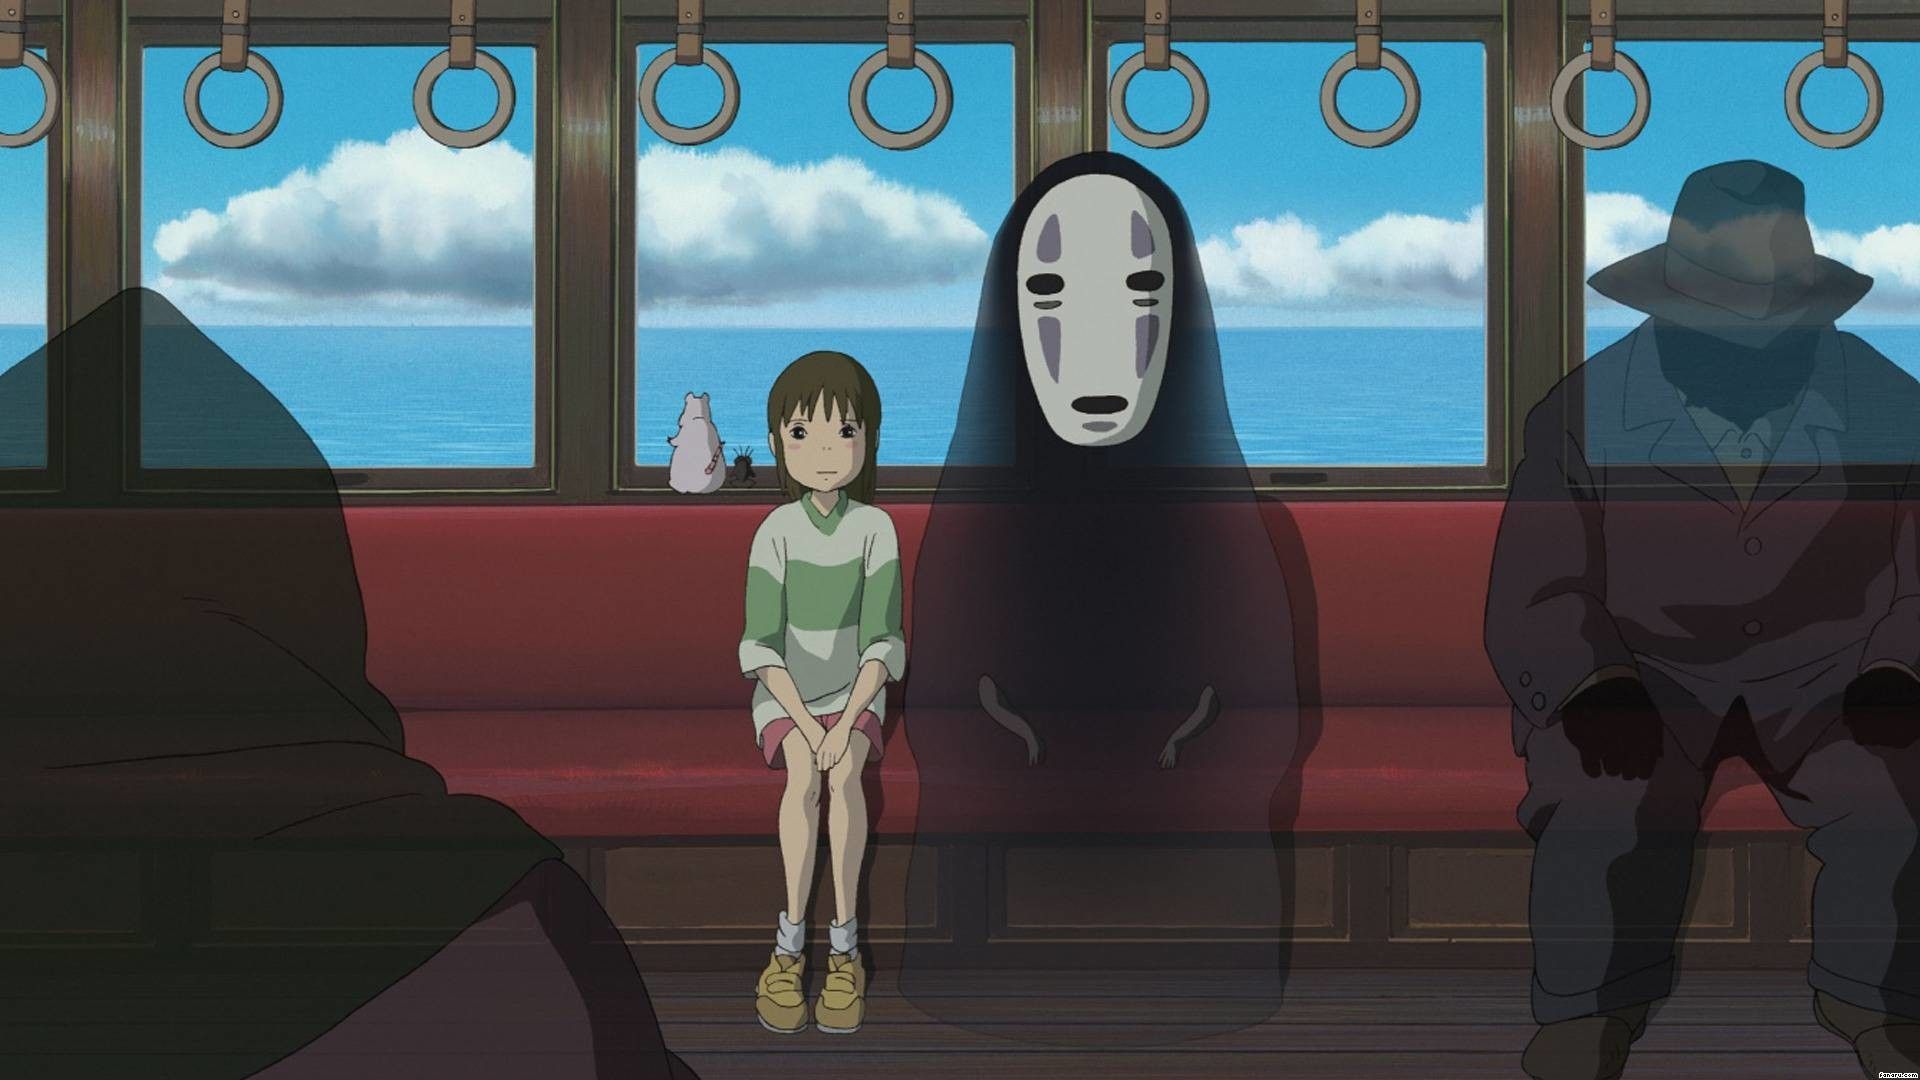 Ghibli is present in the film and television industry